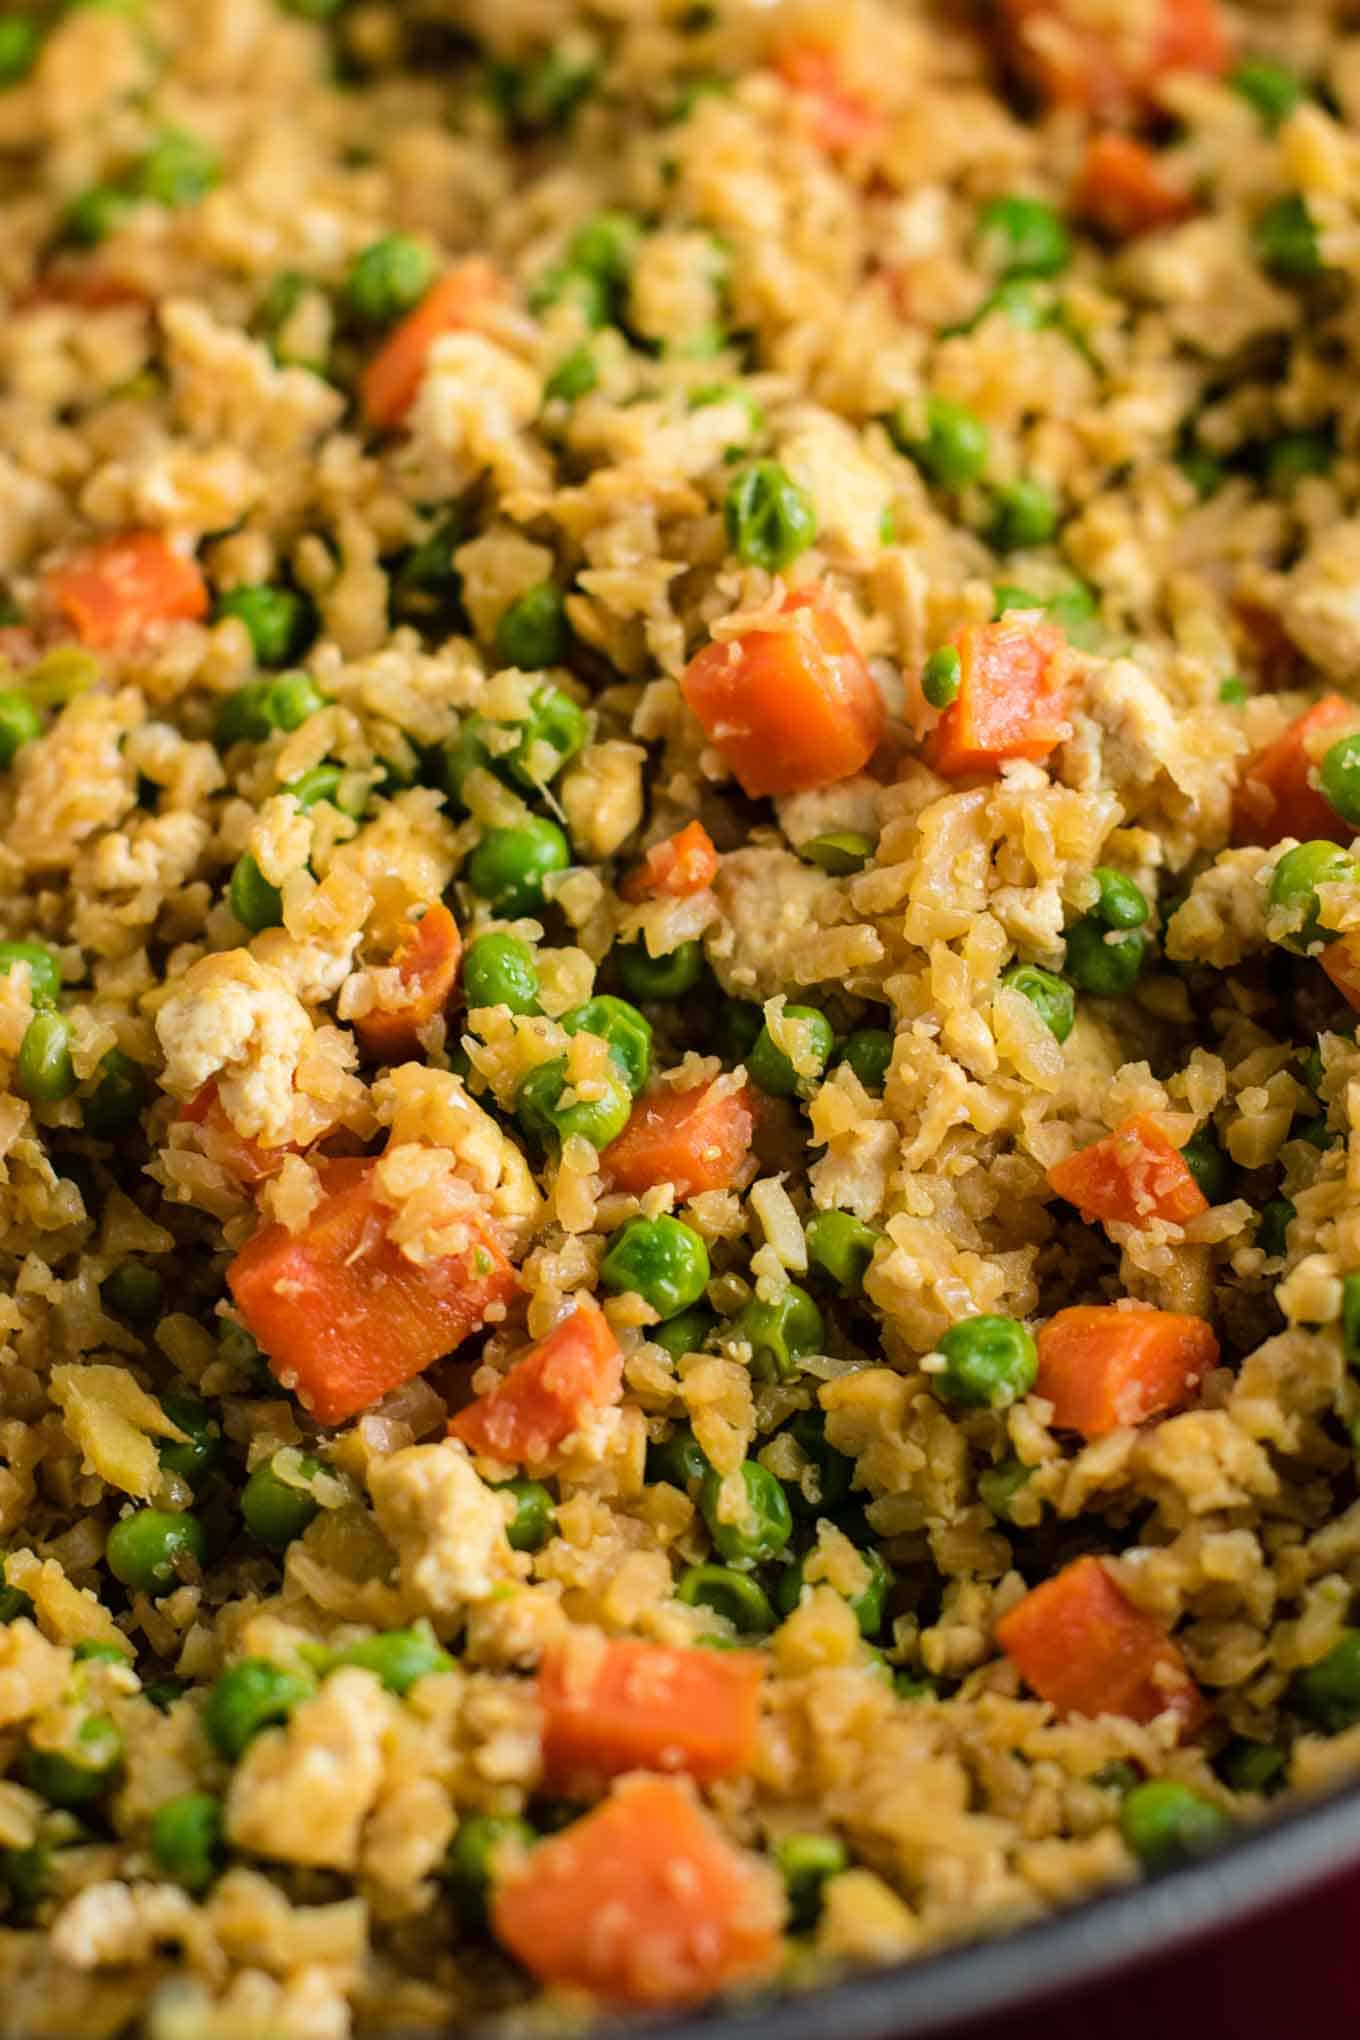 This cauliflower tofu fried rice is vegan, gluten free, grain free, and low carb. You won't believe this doesn't have rice or eggs in it! My new favorite dinner recipe! #grainfree #glutenfree #cauliflowerfriedrice #tofufriedrice #vegan #dinner #eggfree